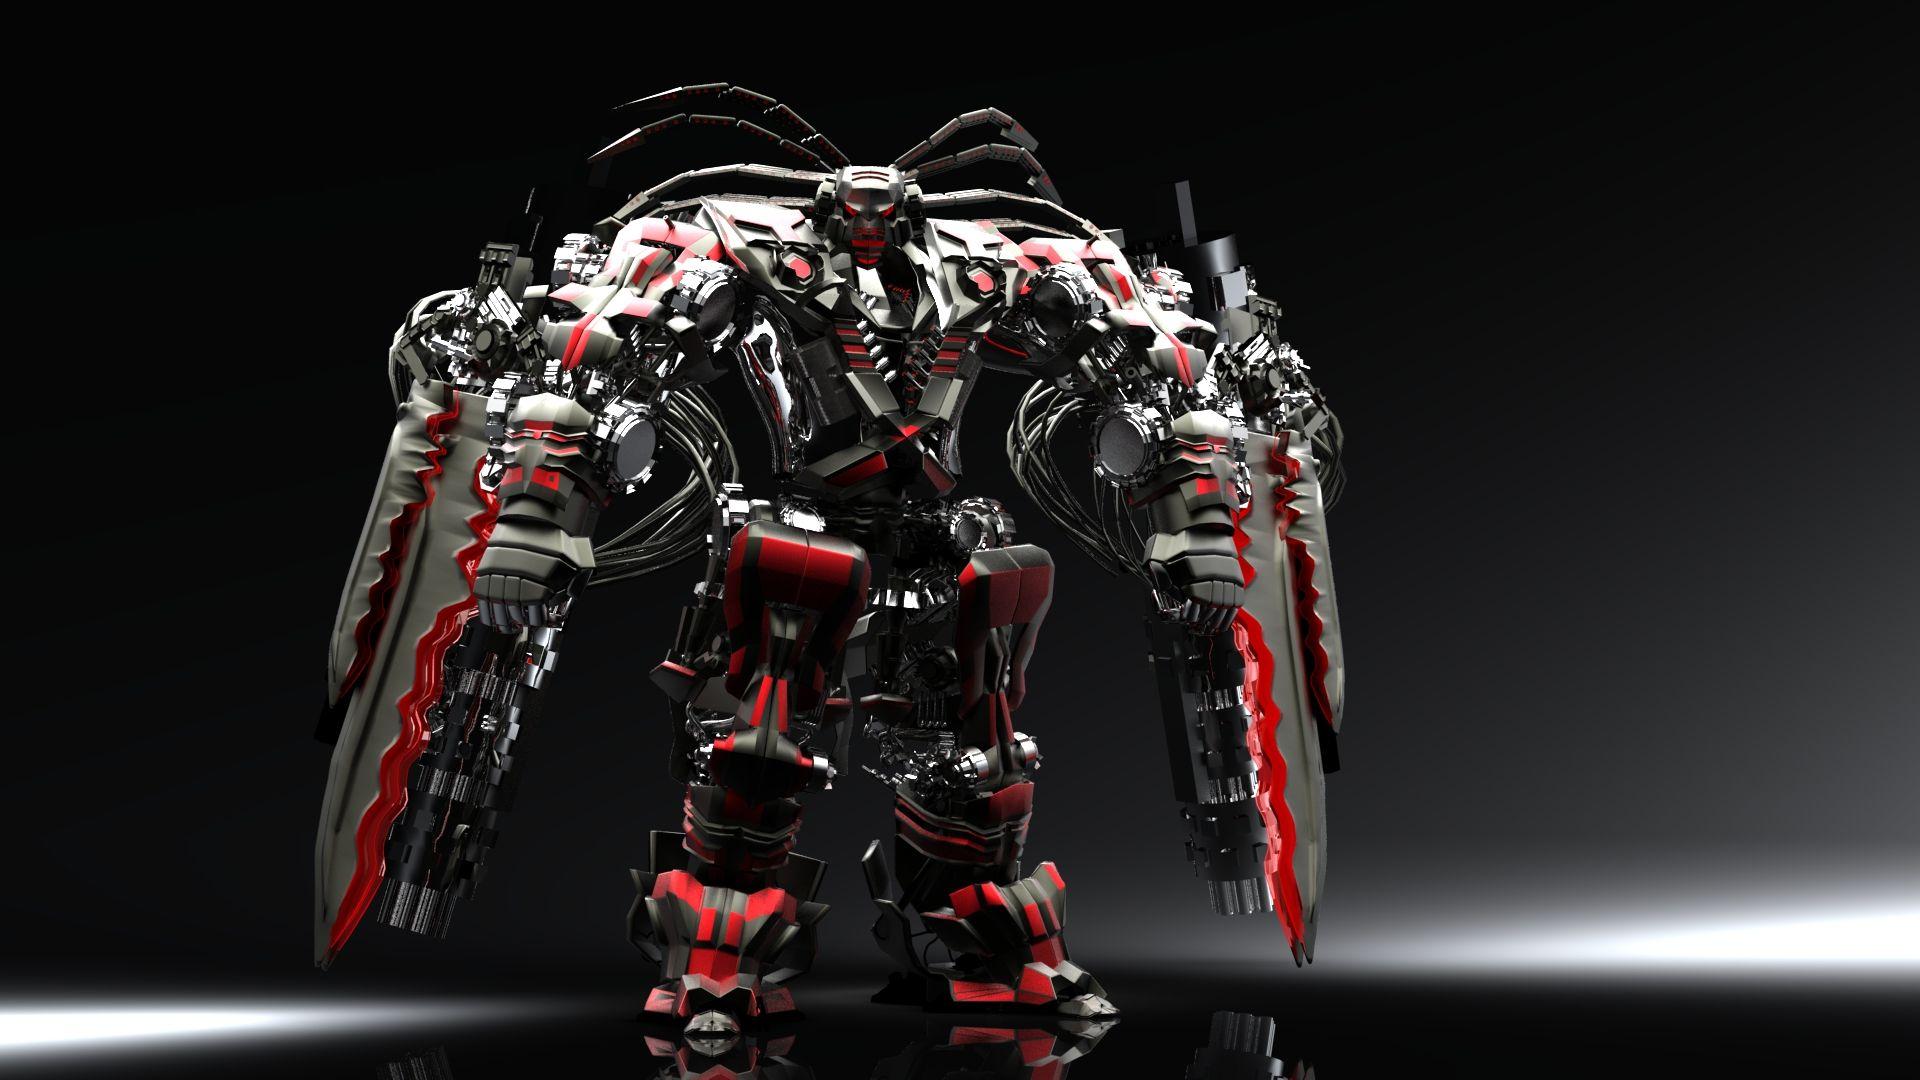 Awesome HD Robot Wallpaper & Background For Free Download